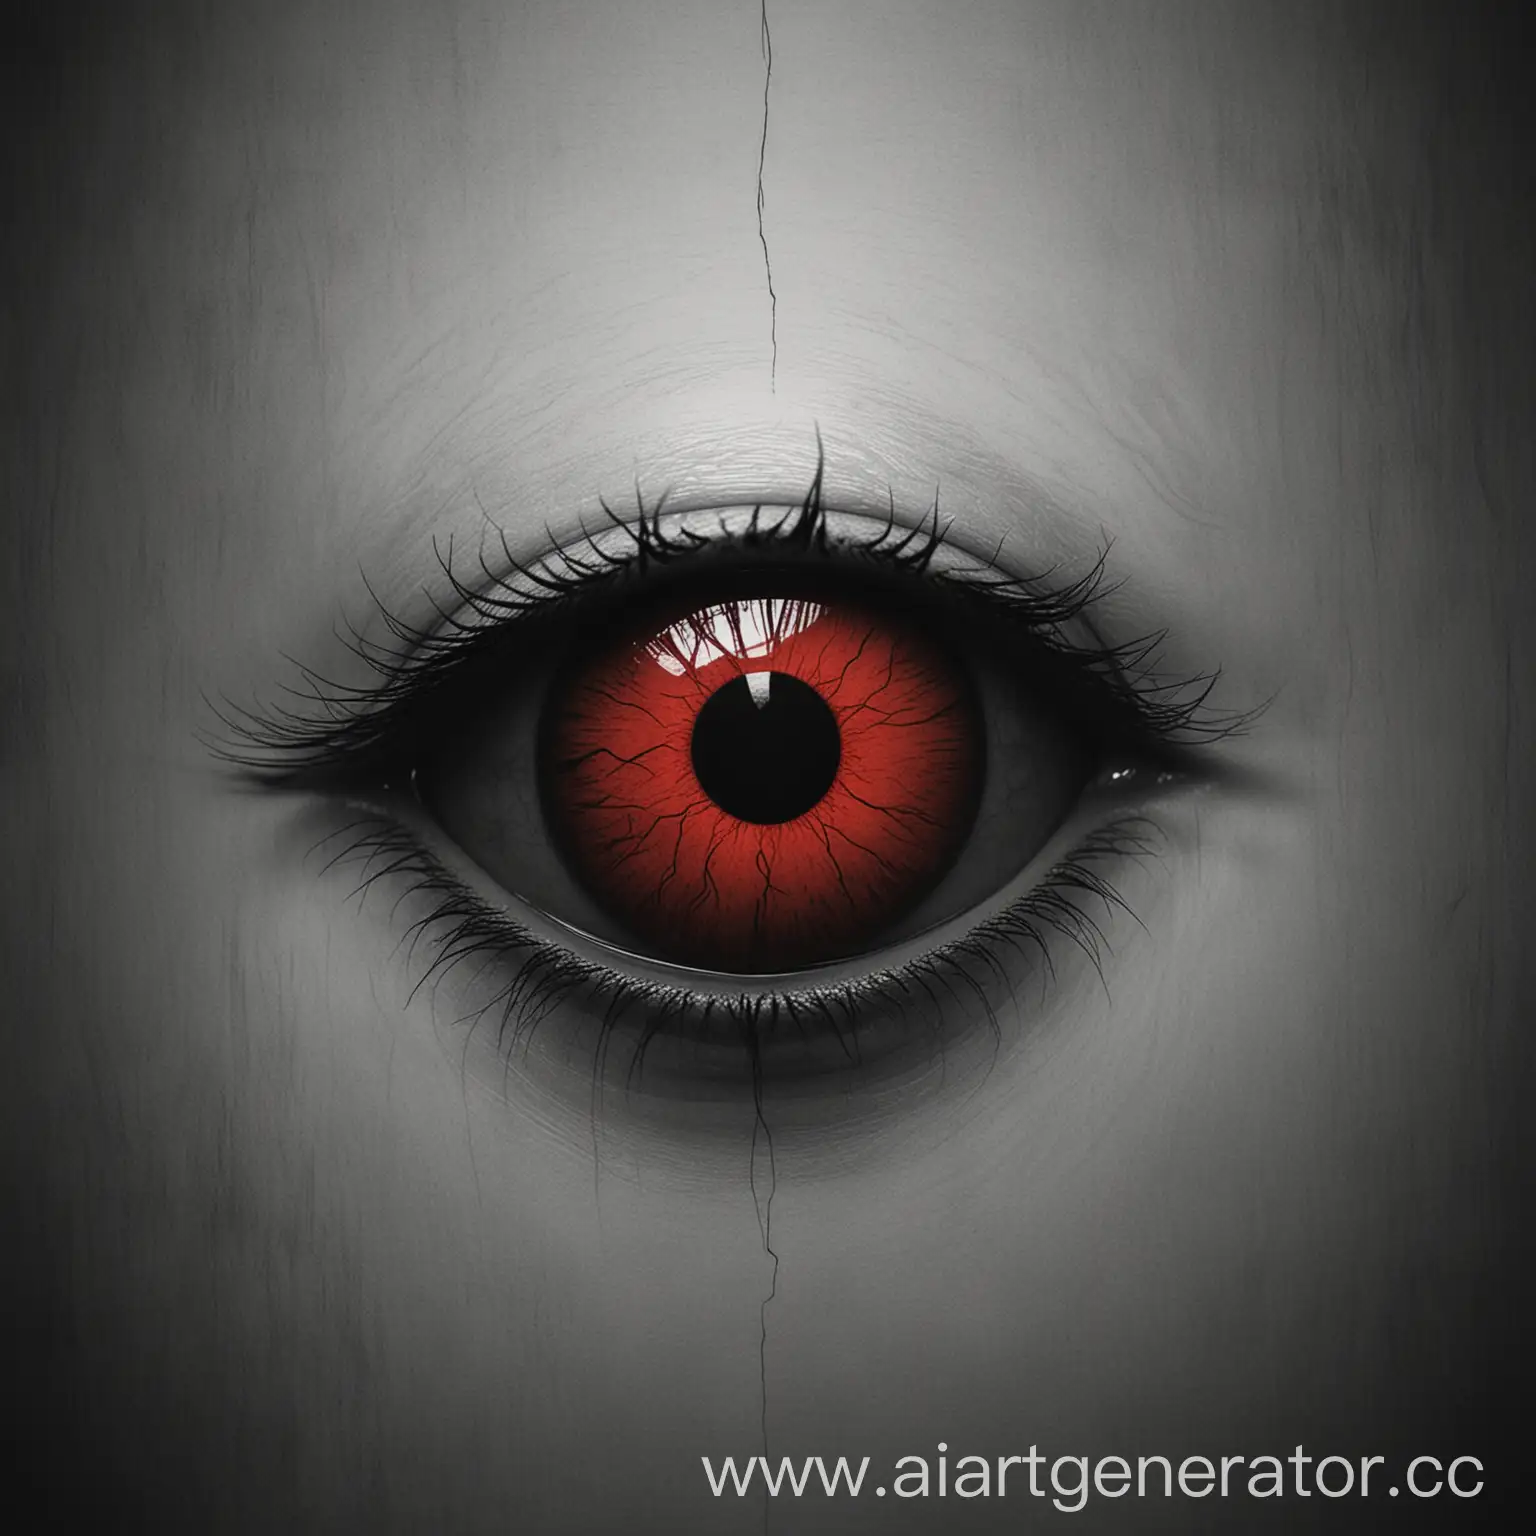 Minimalist black and white cover with a single red demonic eye staring out of the darkness in soft tones